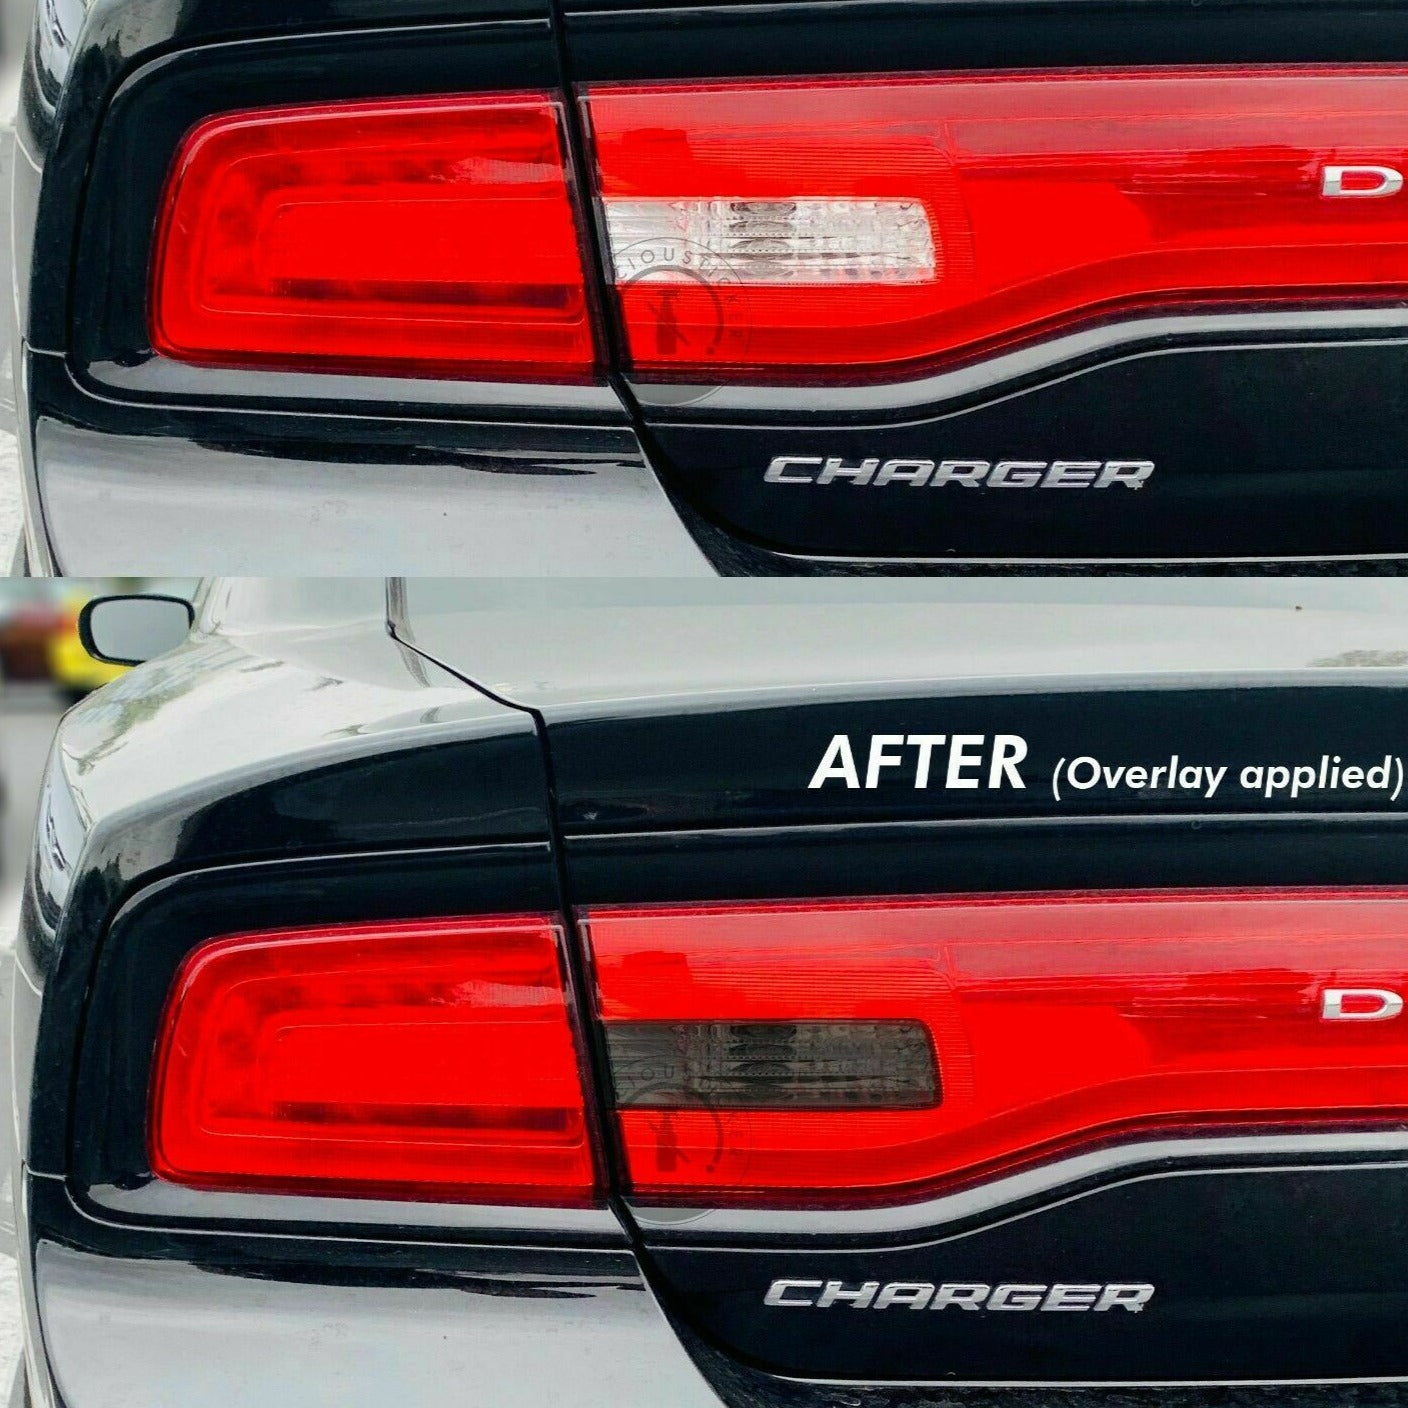 Smoked REVERSE Tail Light Overlays (Fits For: 2011-2014 Dodge Charger)